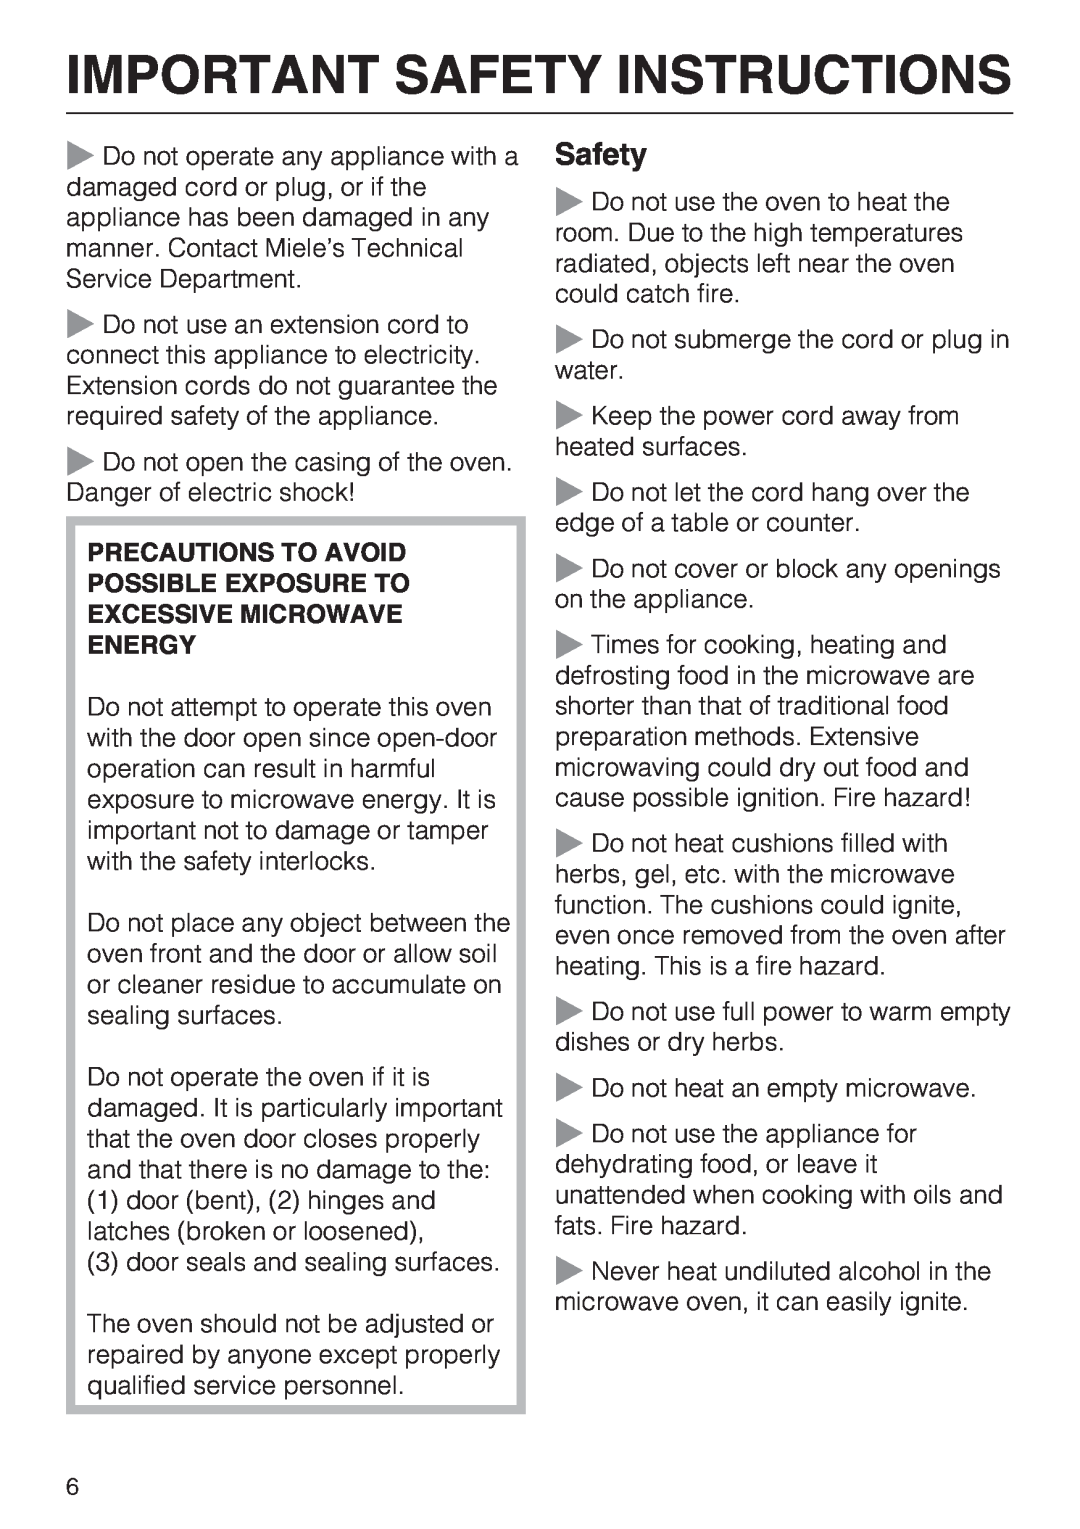 Miele M8260-1 Precautions To Avoid Possible Exposure To Excessive Microwave Energy, Important Safety Instructions 